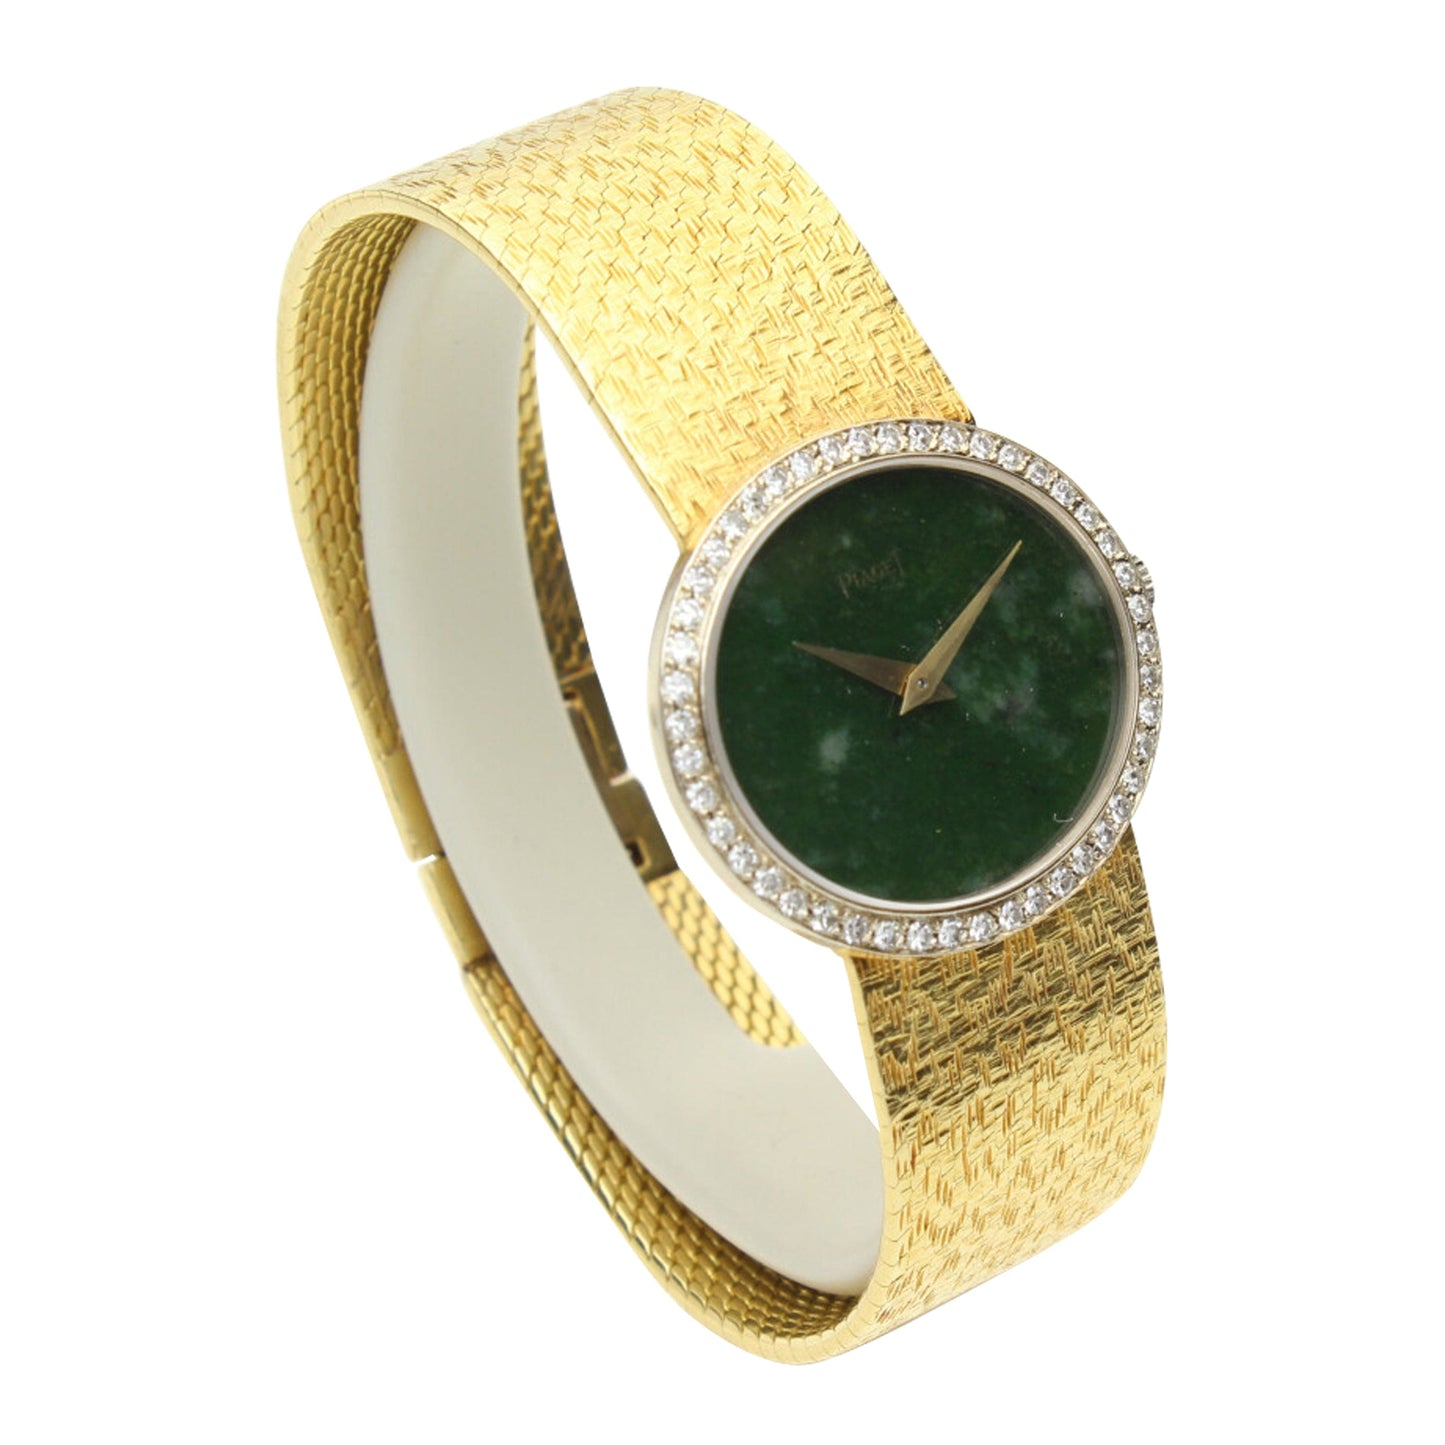 18ct yellow gold Piaget, reference 9805 bracelet watch with Nephrite dial and diamond set bezel. Made 1970's